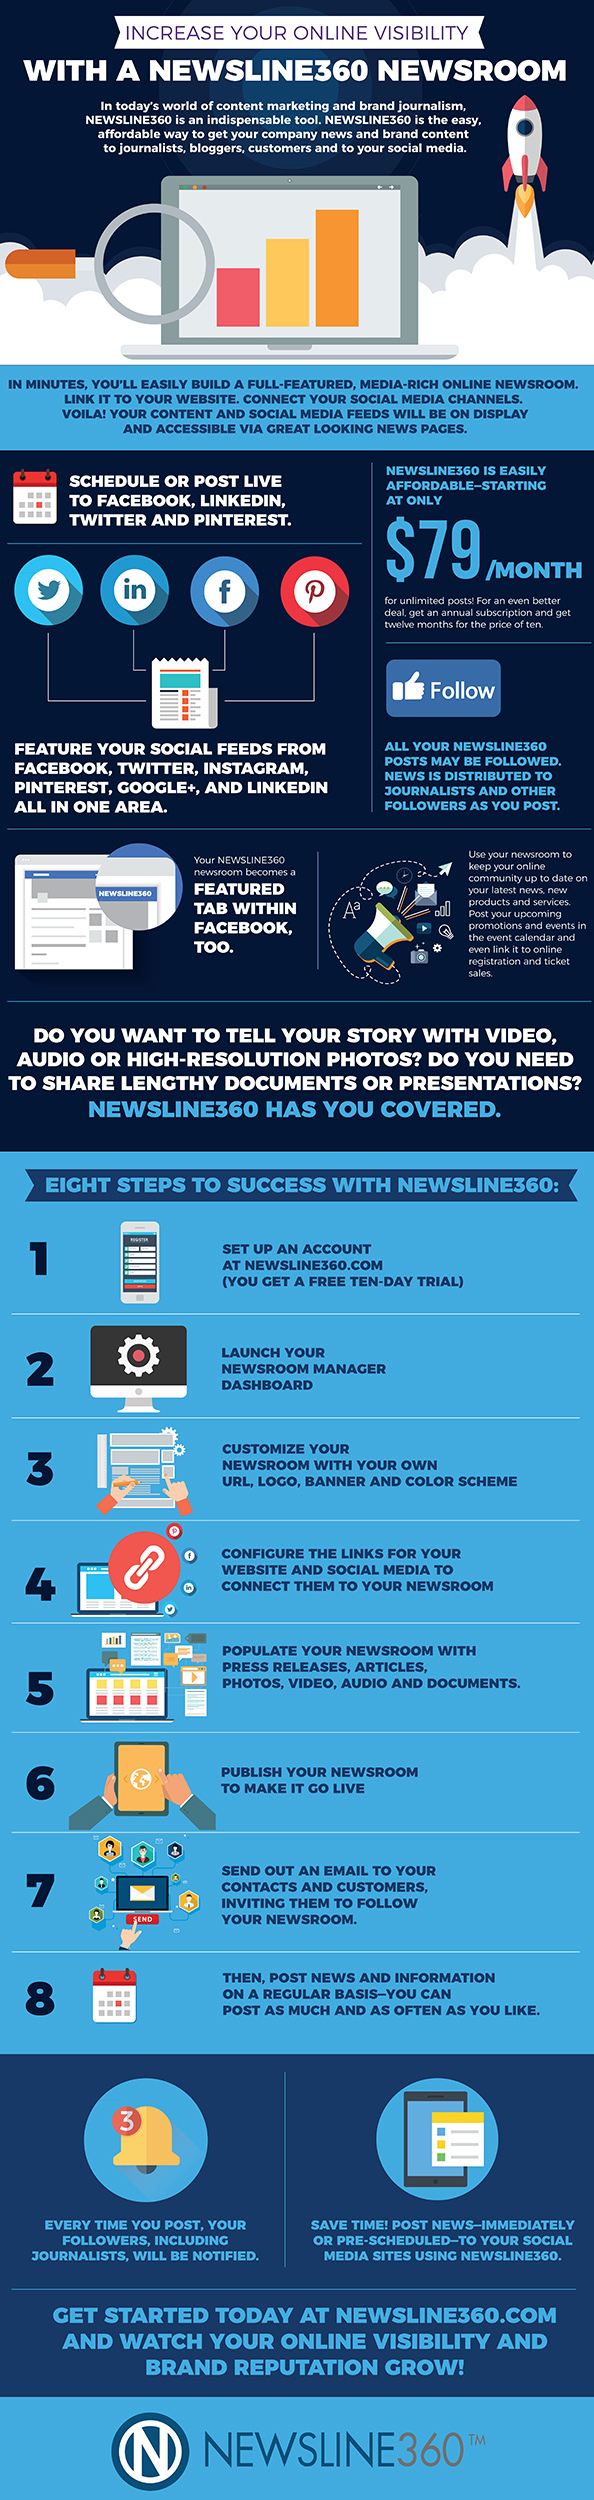 Setting Up Your Newsroom Made Easy